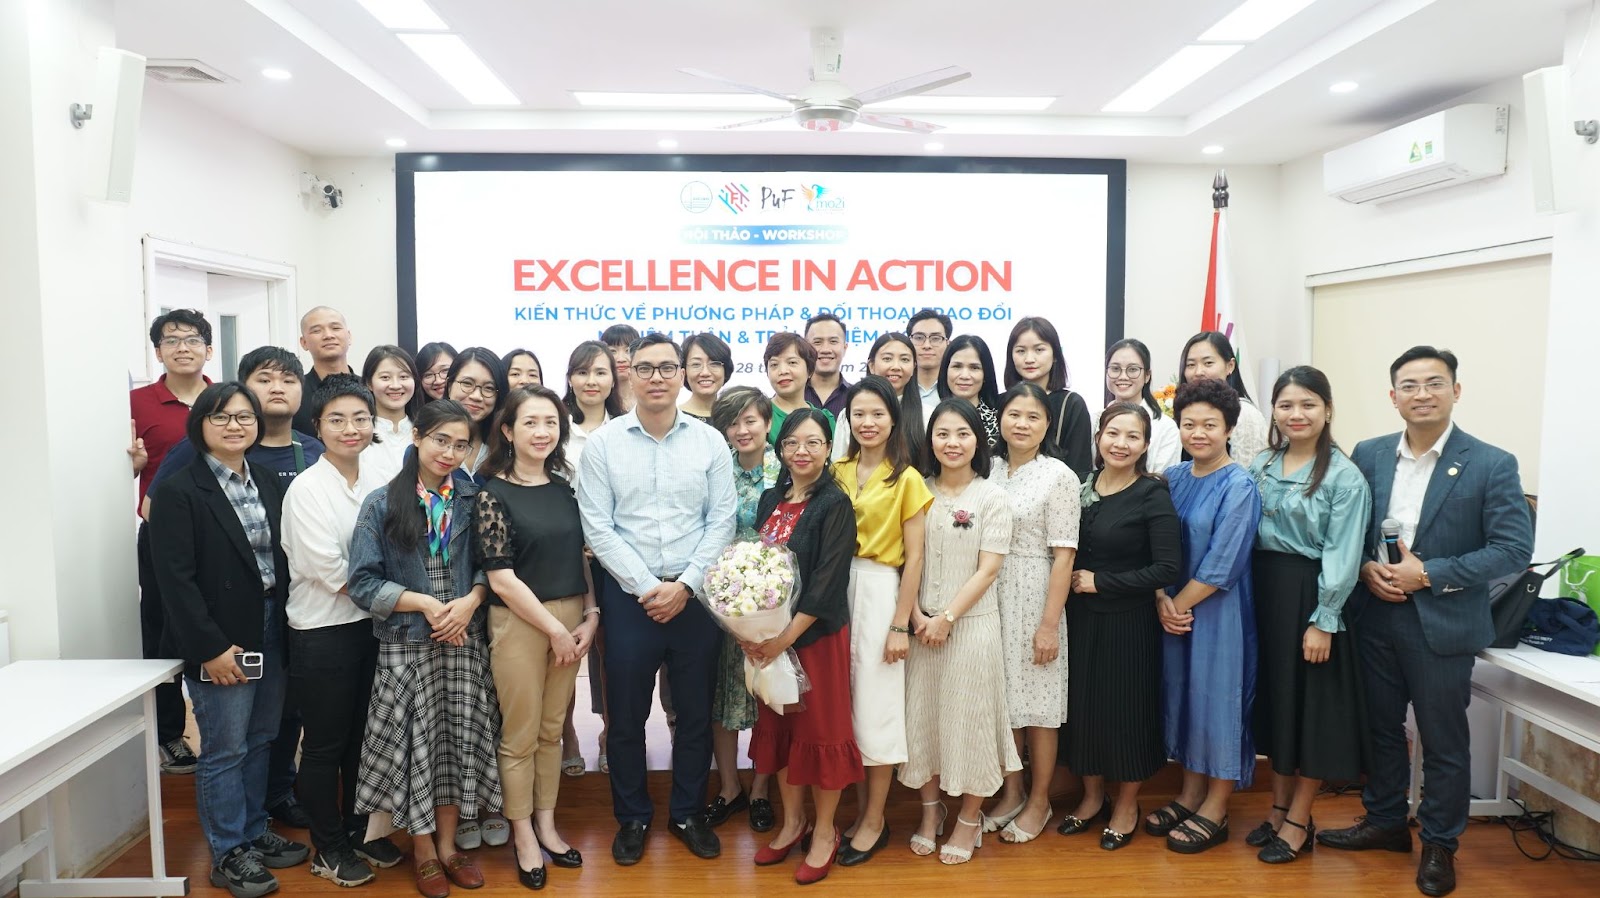 Hội thảo “Excellence in action” 